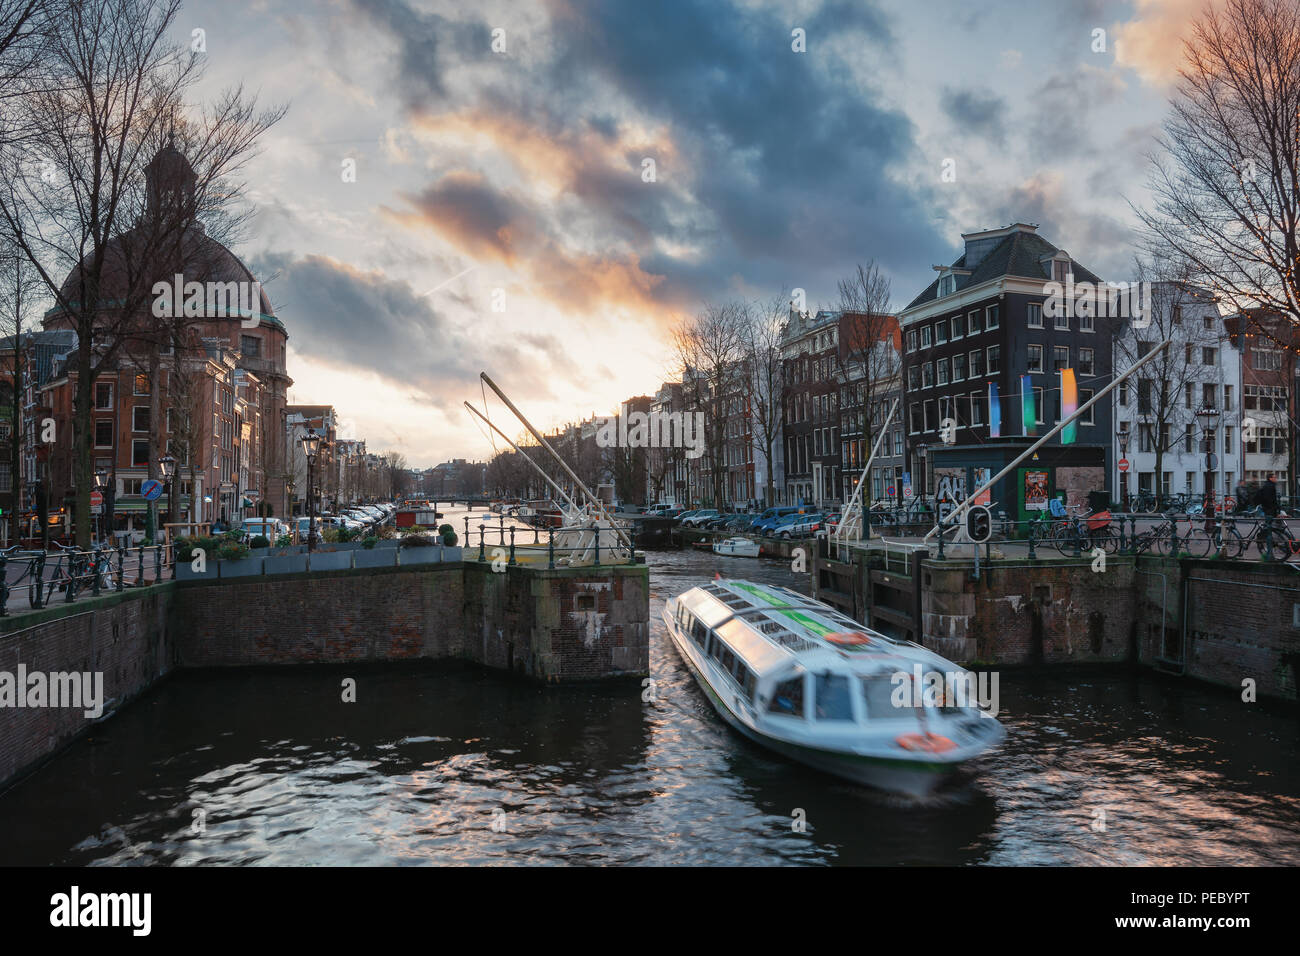 Amsterdam, The Netherlands, December 26, 2017:  The lock in The Singel canal in the old town of Amsterdam. Stock Photo